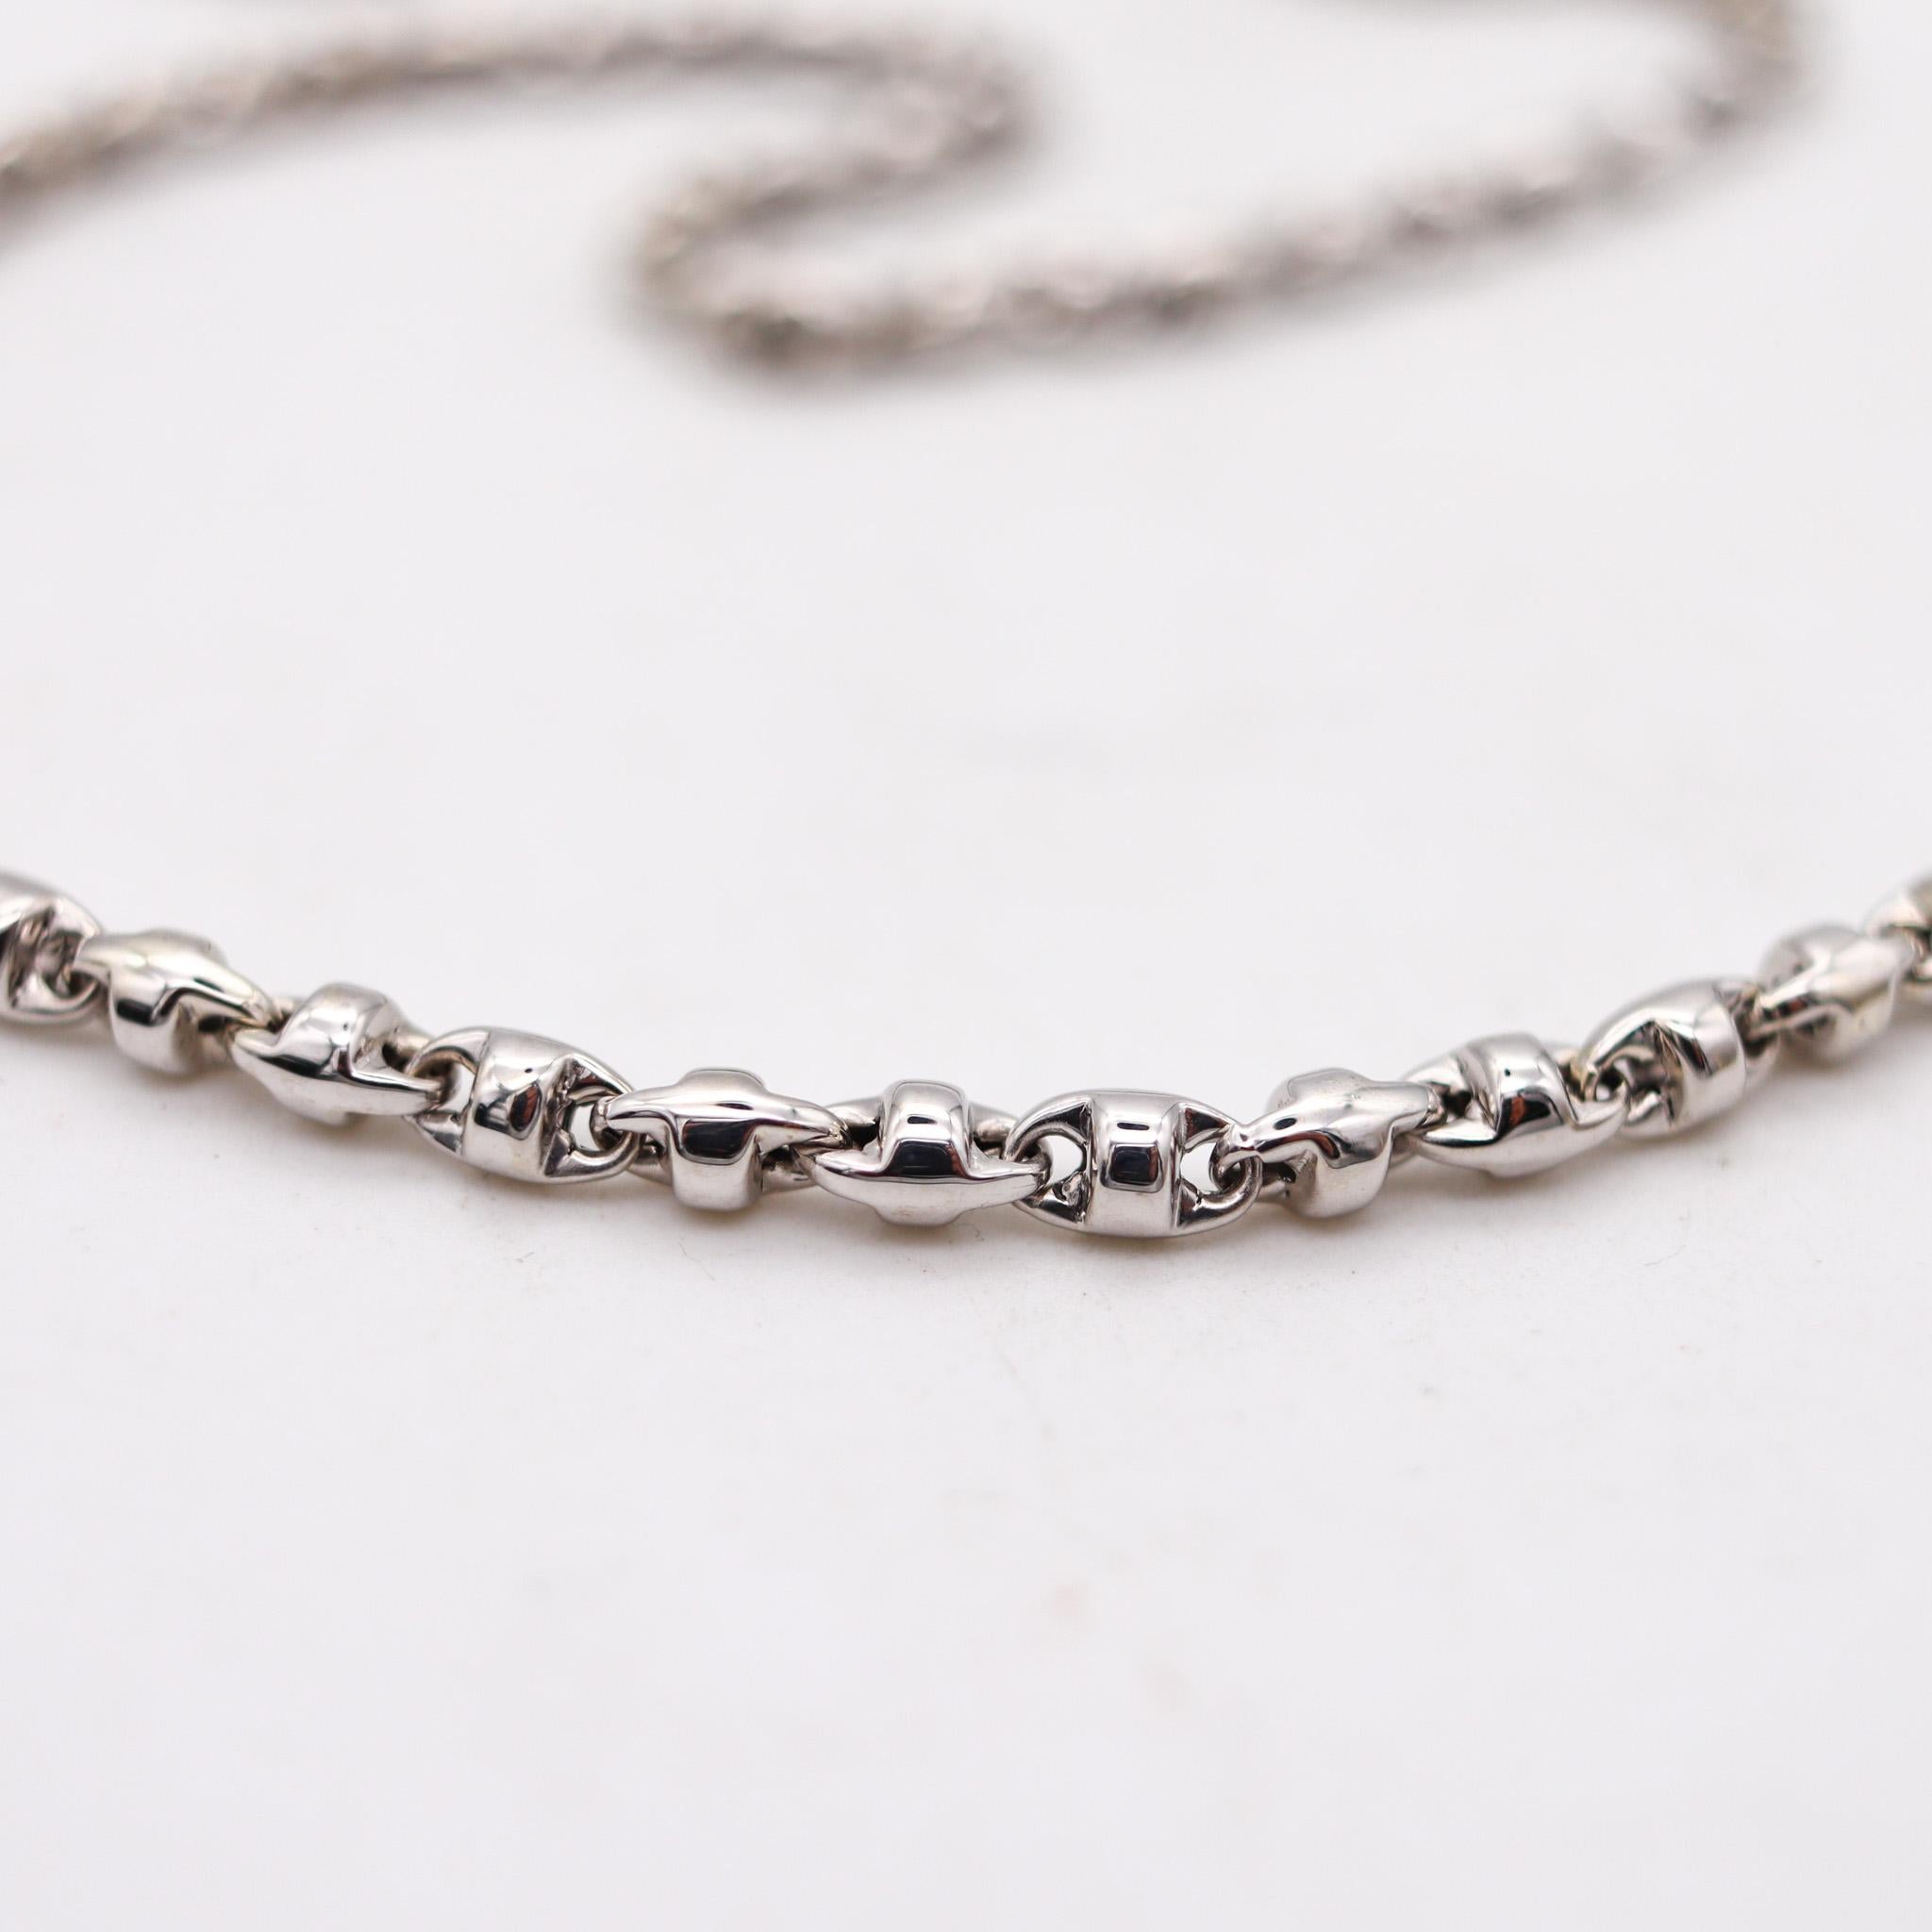 An Italian gold chain necklace designed by Antonio Songa.

Beautiful modernist chain, created in Milano Italy at the jewelry workshop of Antonio Songa. Crafted with fancy links in solid white gold of 18 karats with high polished and platinum finish.